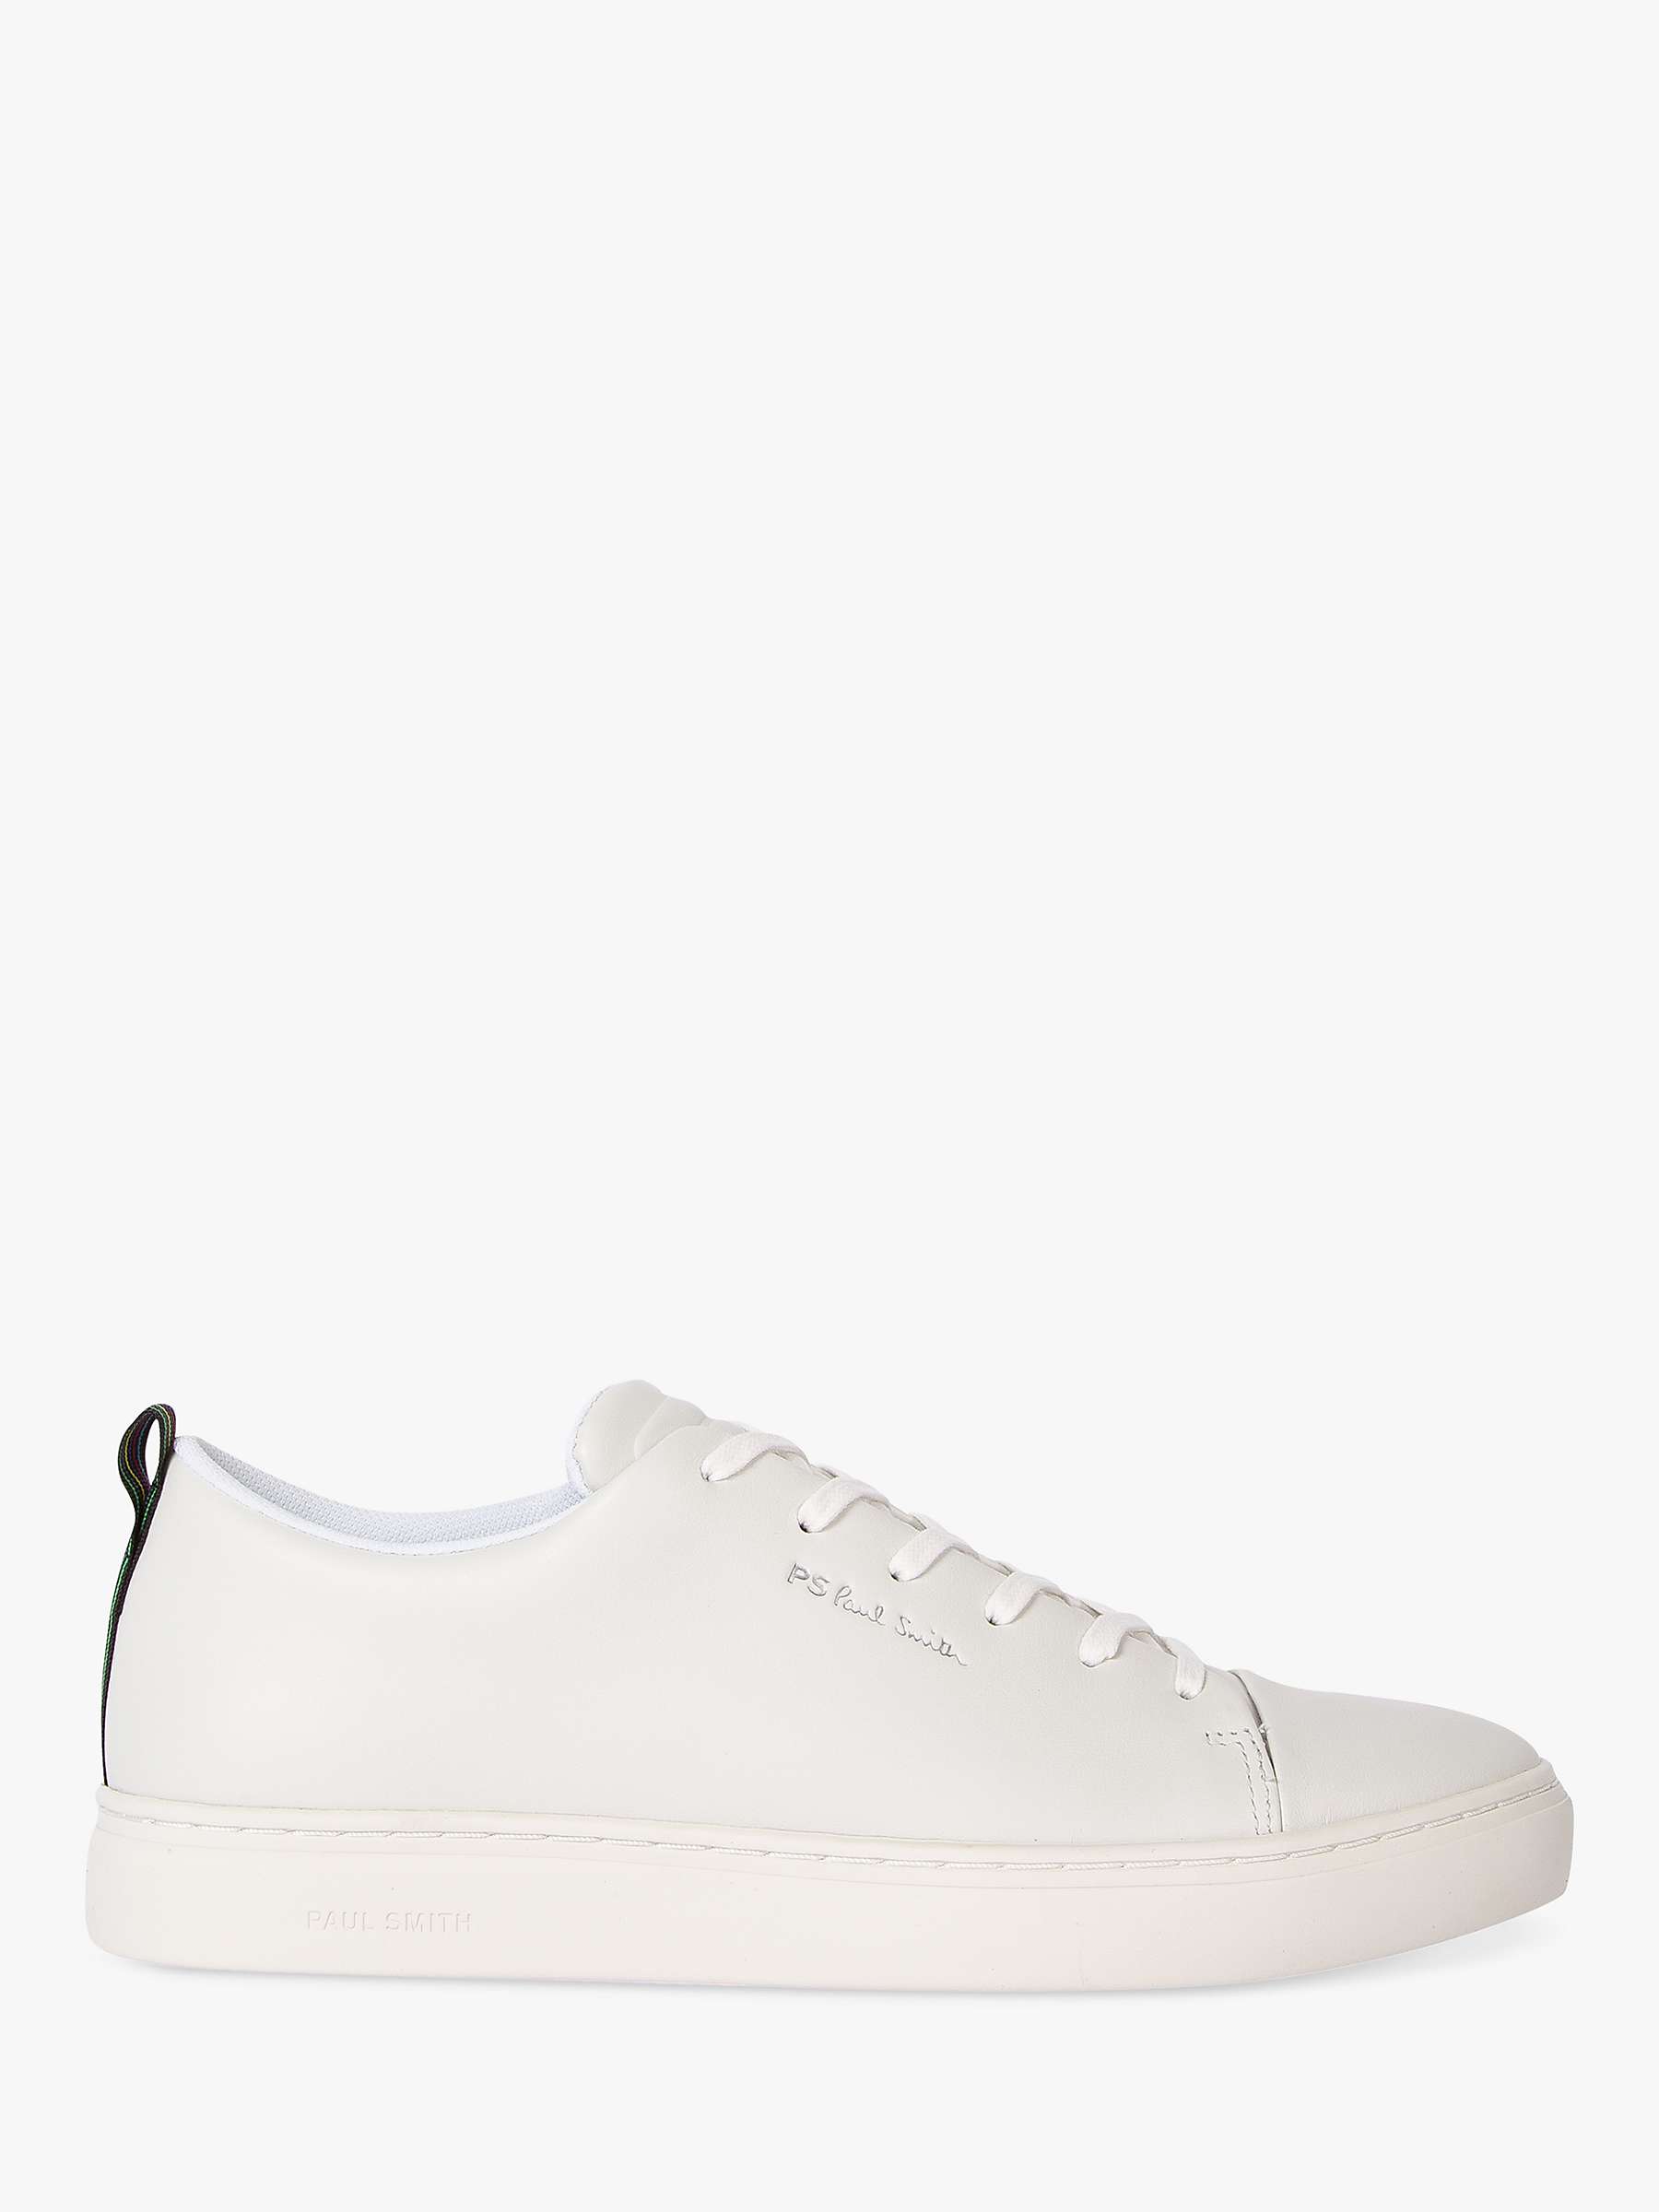 Buy Paul Smith Lee Cupsole Trainers Online at johnlewis.com